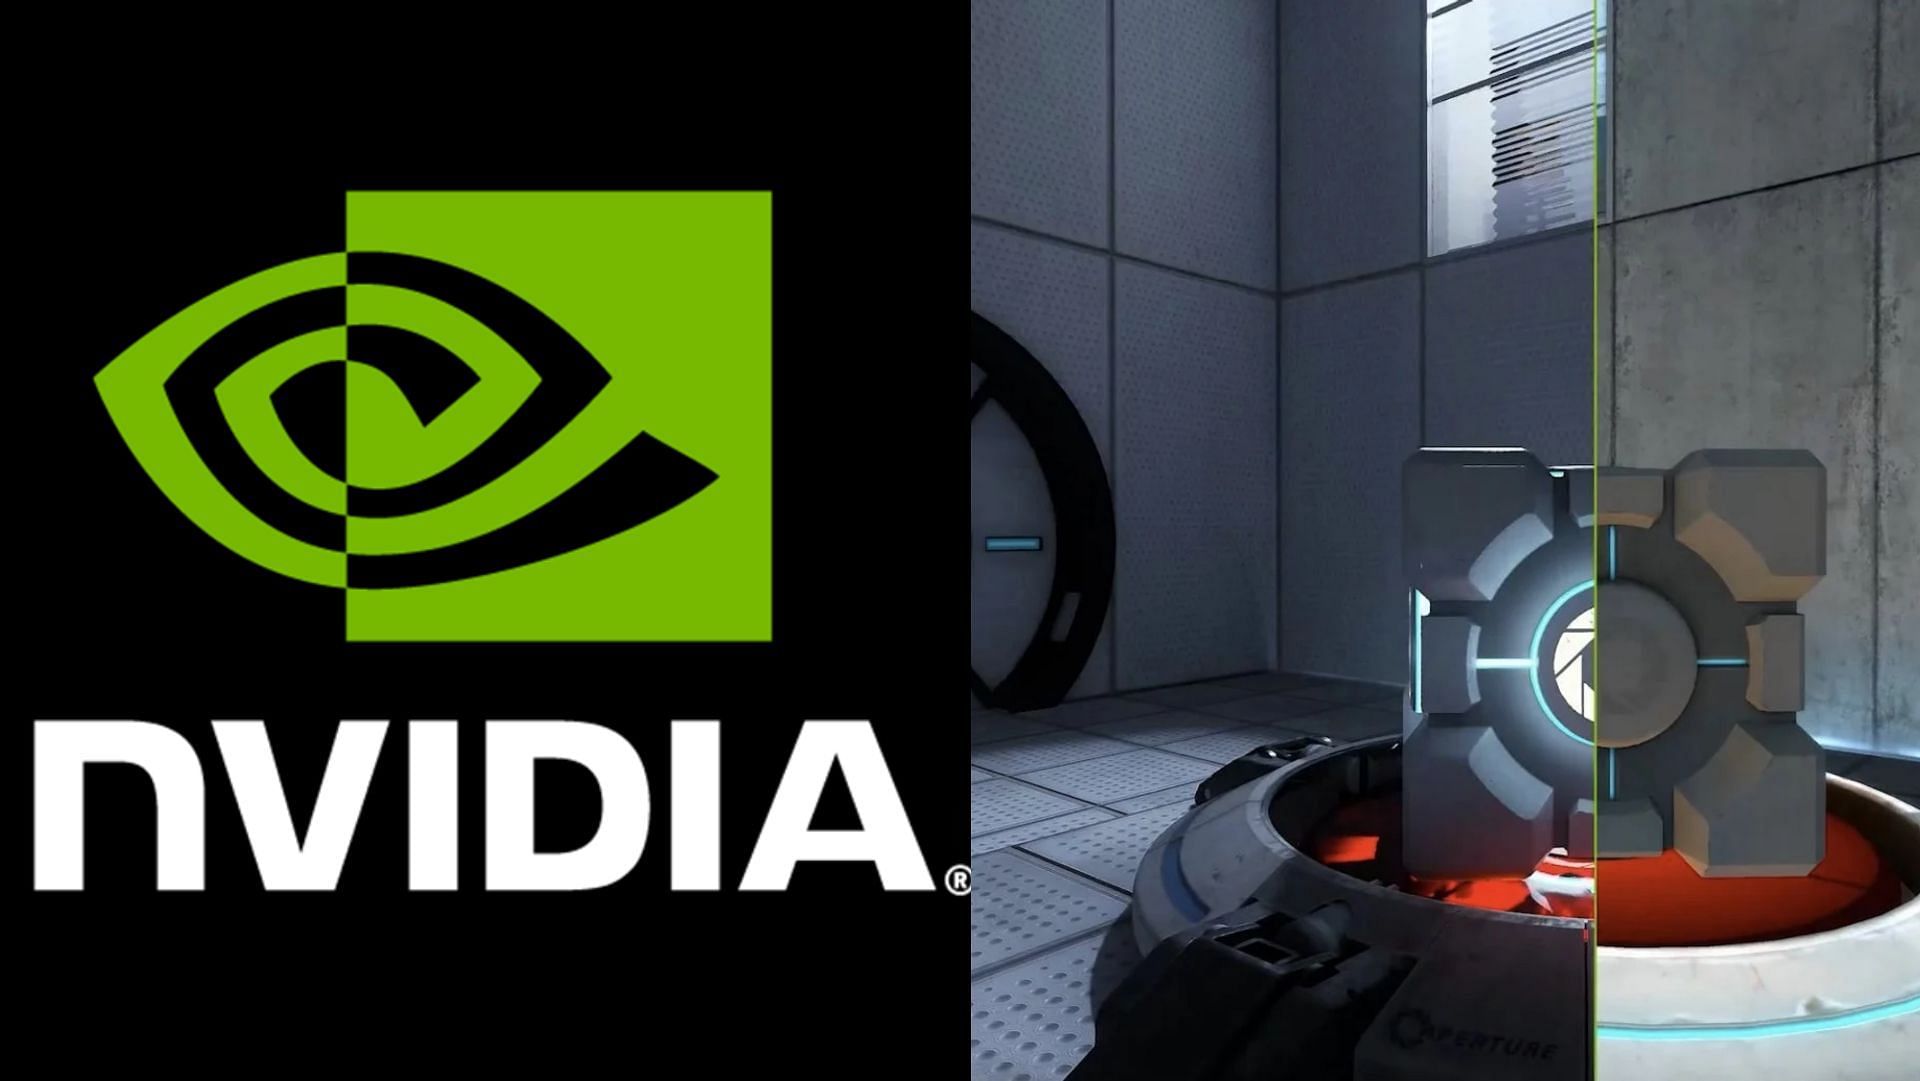 RTX Remix is possibly changing modding forever (Image by Nvidia and Valve)